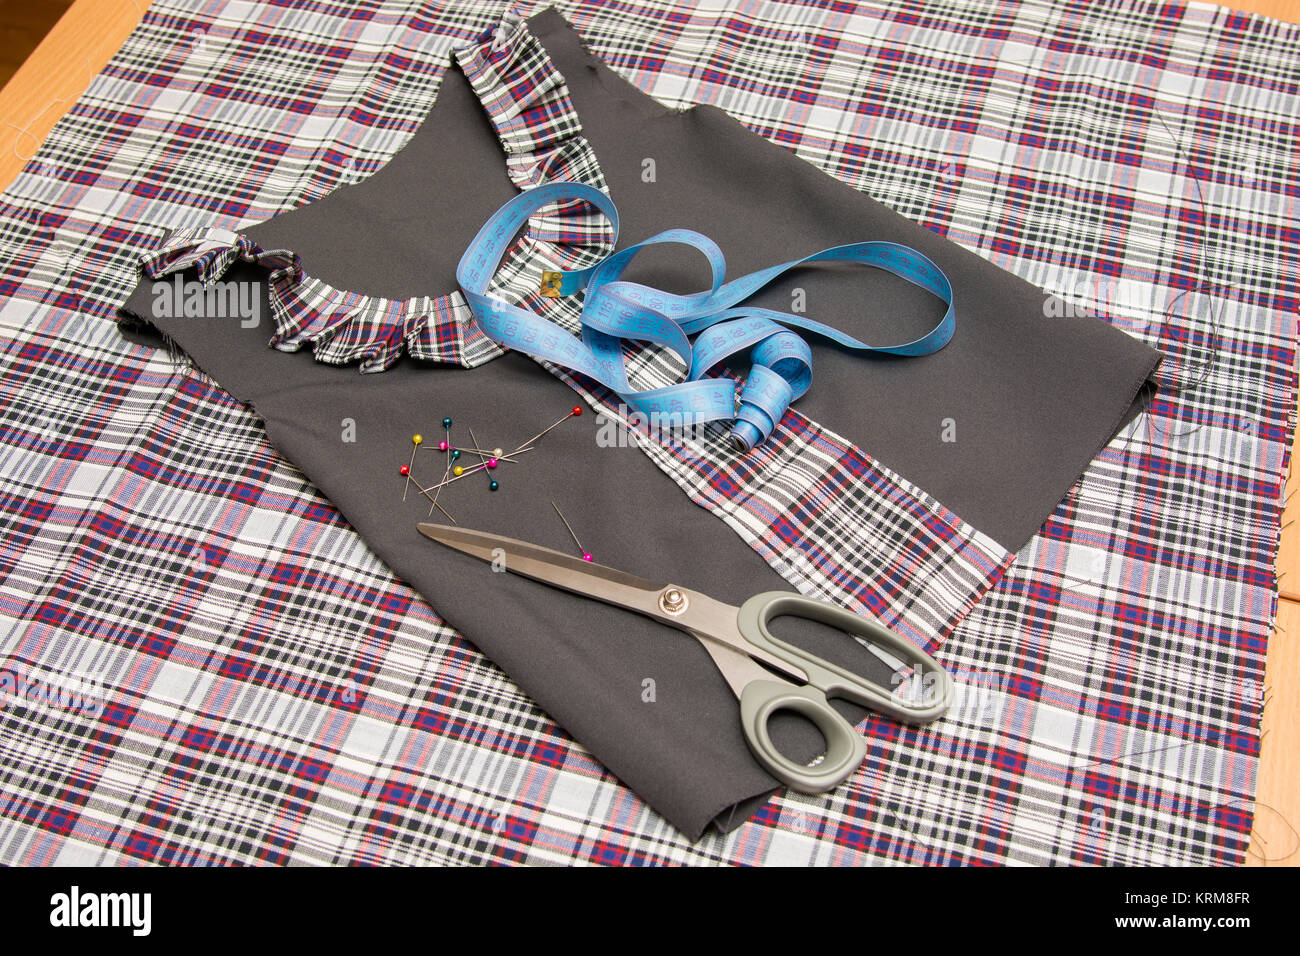 children's school uniforms and clothing accessories Stock Photo